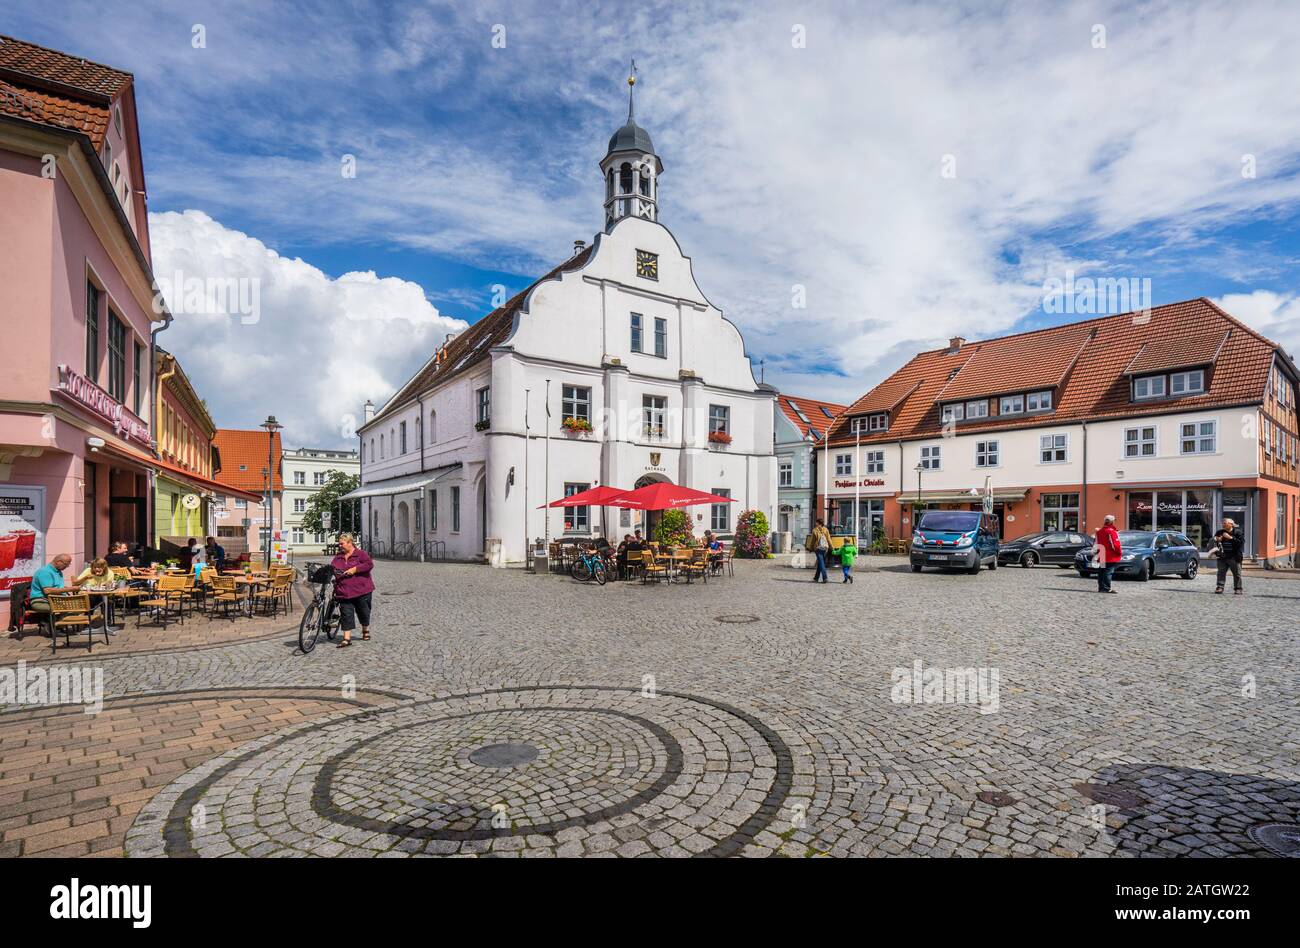 Old town hall of Wolgast at Town Hall Square, Vorpommern-Greifswald, Mecklenburg-Vorpommern, Germany Stock Photo